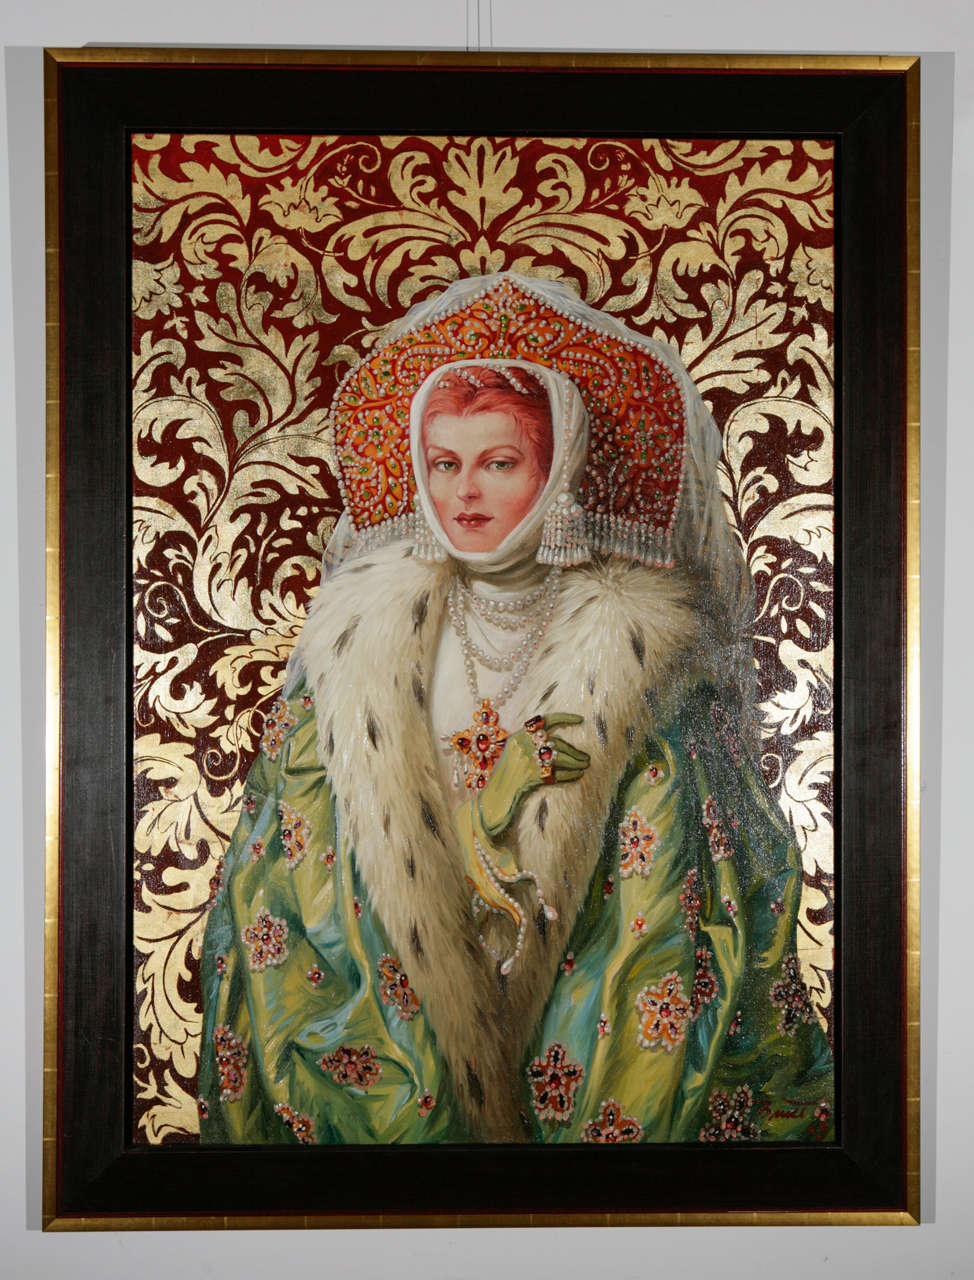 A dramatic painting of a Russian Tzarine on a gold-leafed damask background by contemporary artist, Frenchman, Thierry Bruet (born 1949).  Bruet has been both painter and sculptor for more than 30 yrs and is a master of the traditional technique of